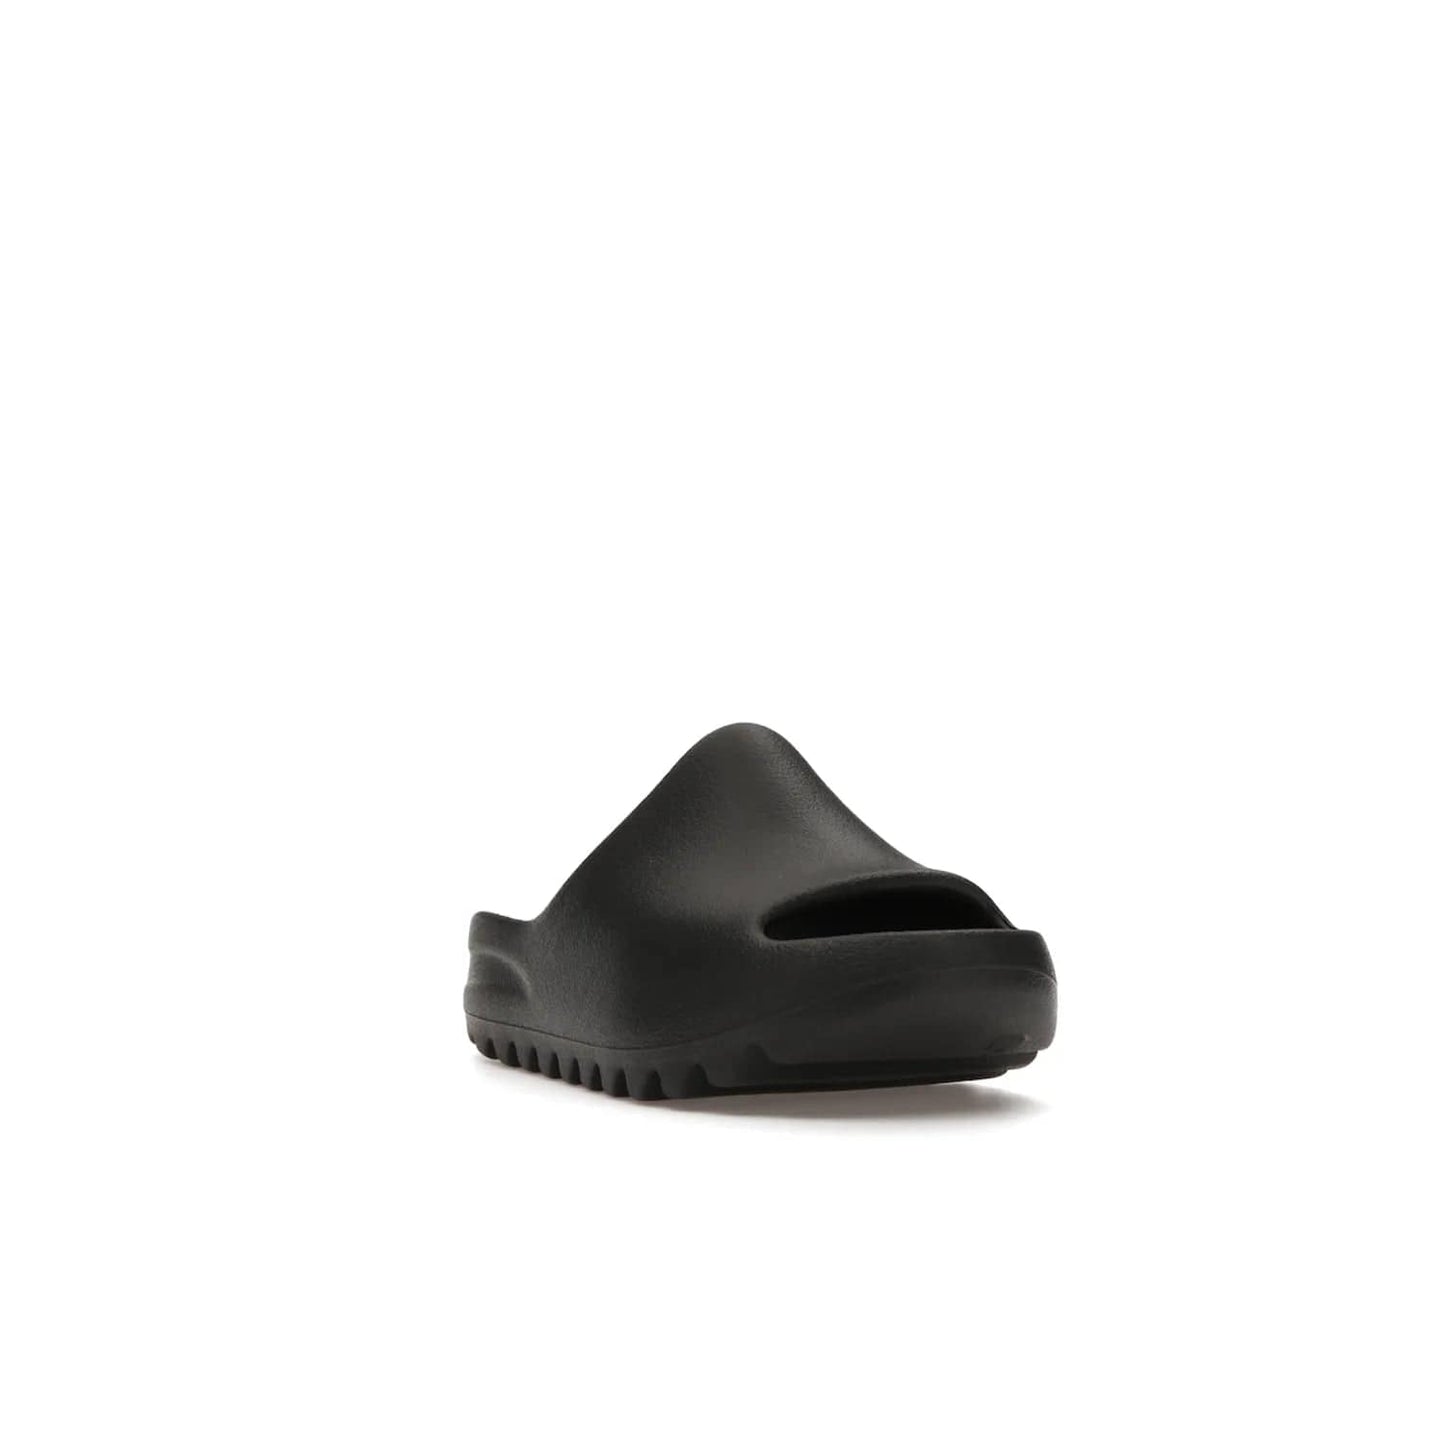 adidas Yeezy Slide Onyx (Kids) - Image 7 - Only at www.BallersClubKickz.com - adidas Yeezy Slide Onyx (Kids): Comfortable foam construction with textured surface and iconic three-stripe logo. Breathable, open-toe design and deep grooves for traction. Released in March 2021 at $50.